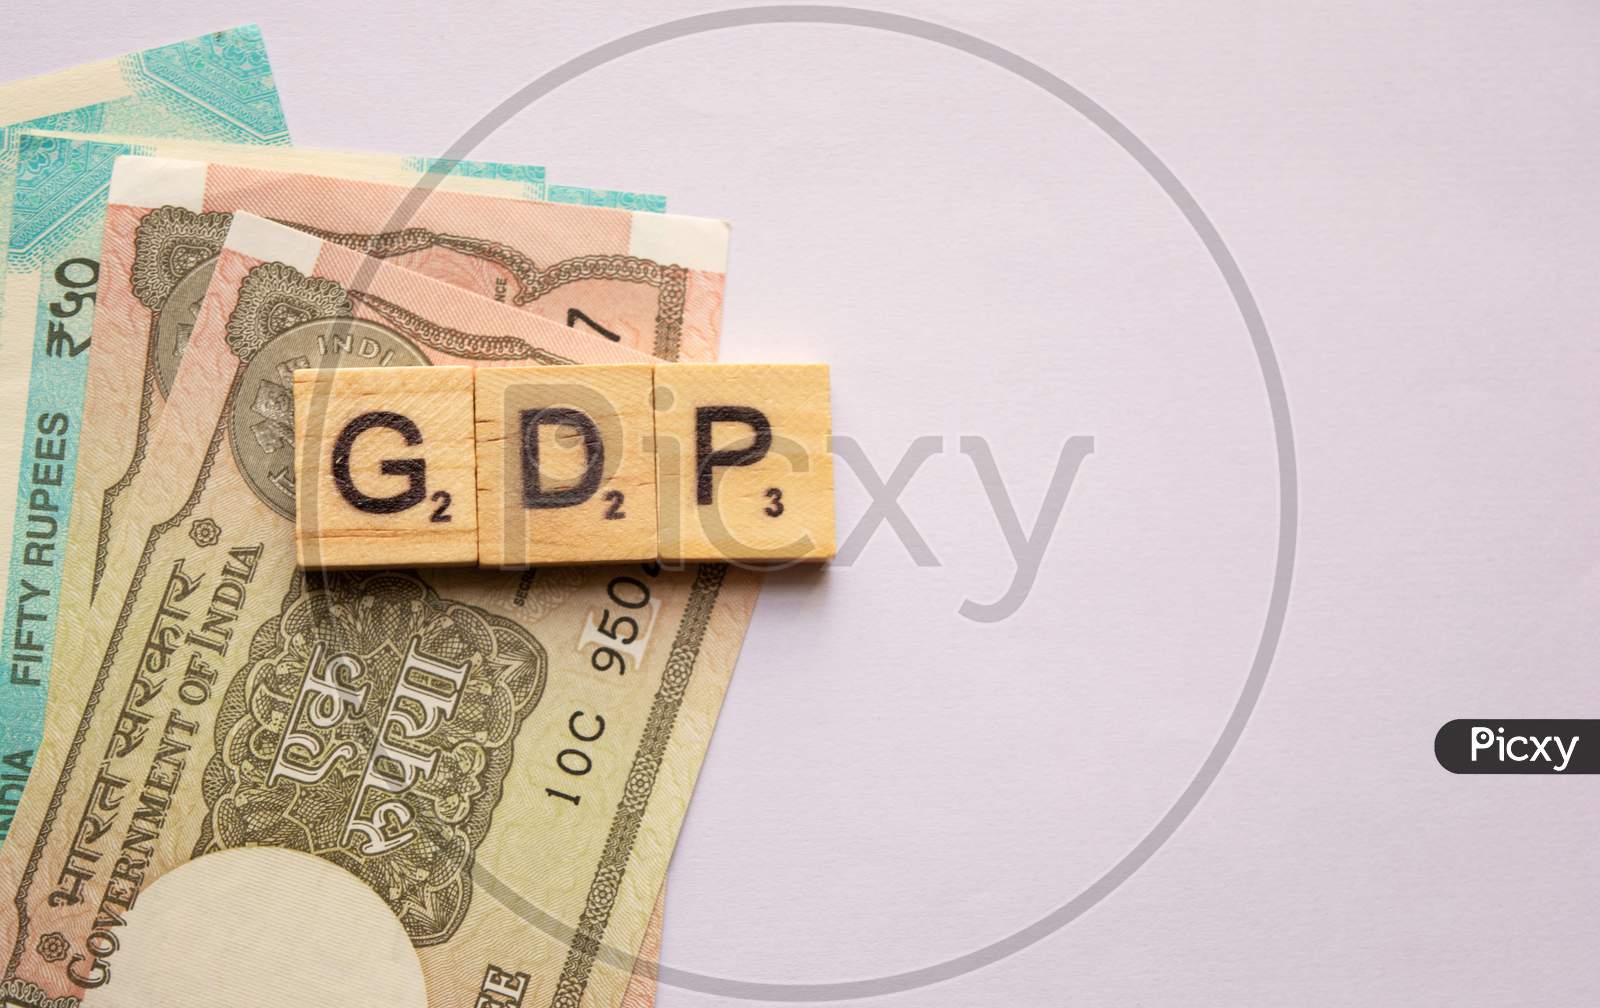 Gdp Or Gross Domestic Product In Wooden Block Letters With Indian Currency On Isolated Background.